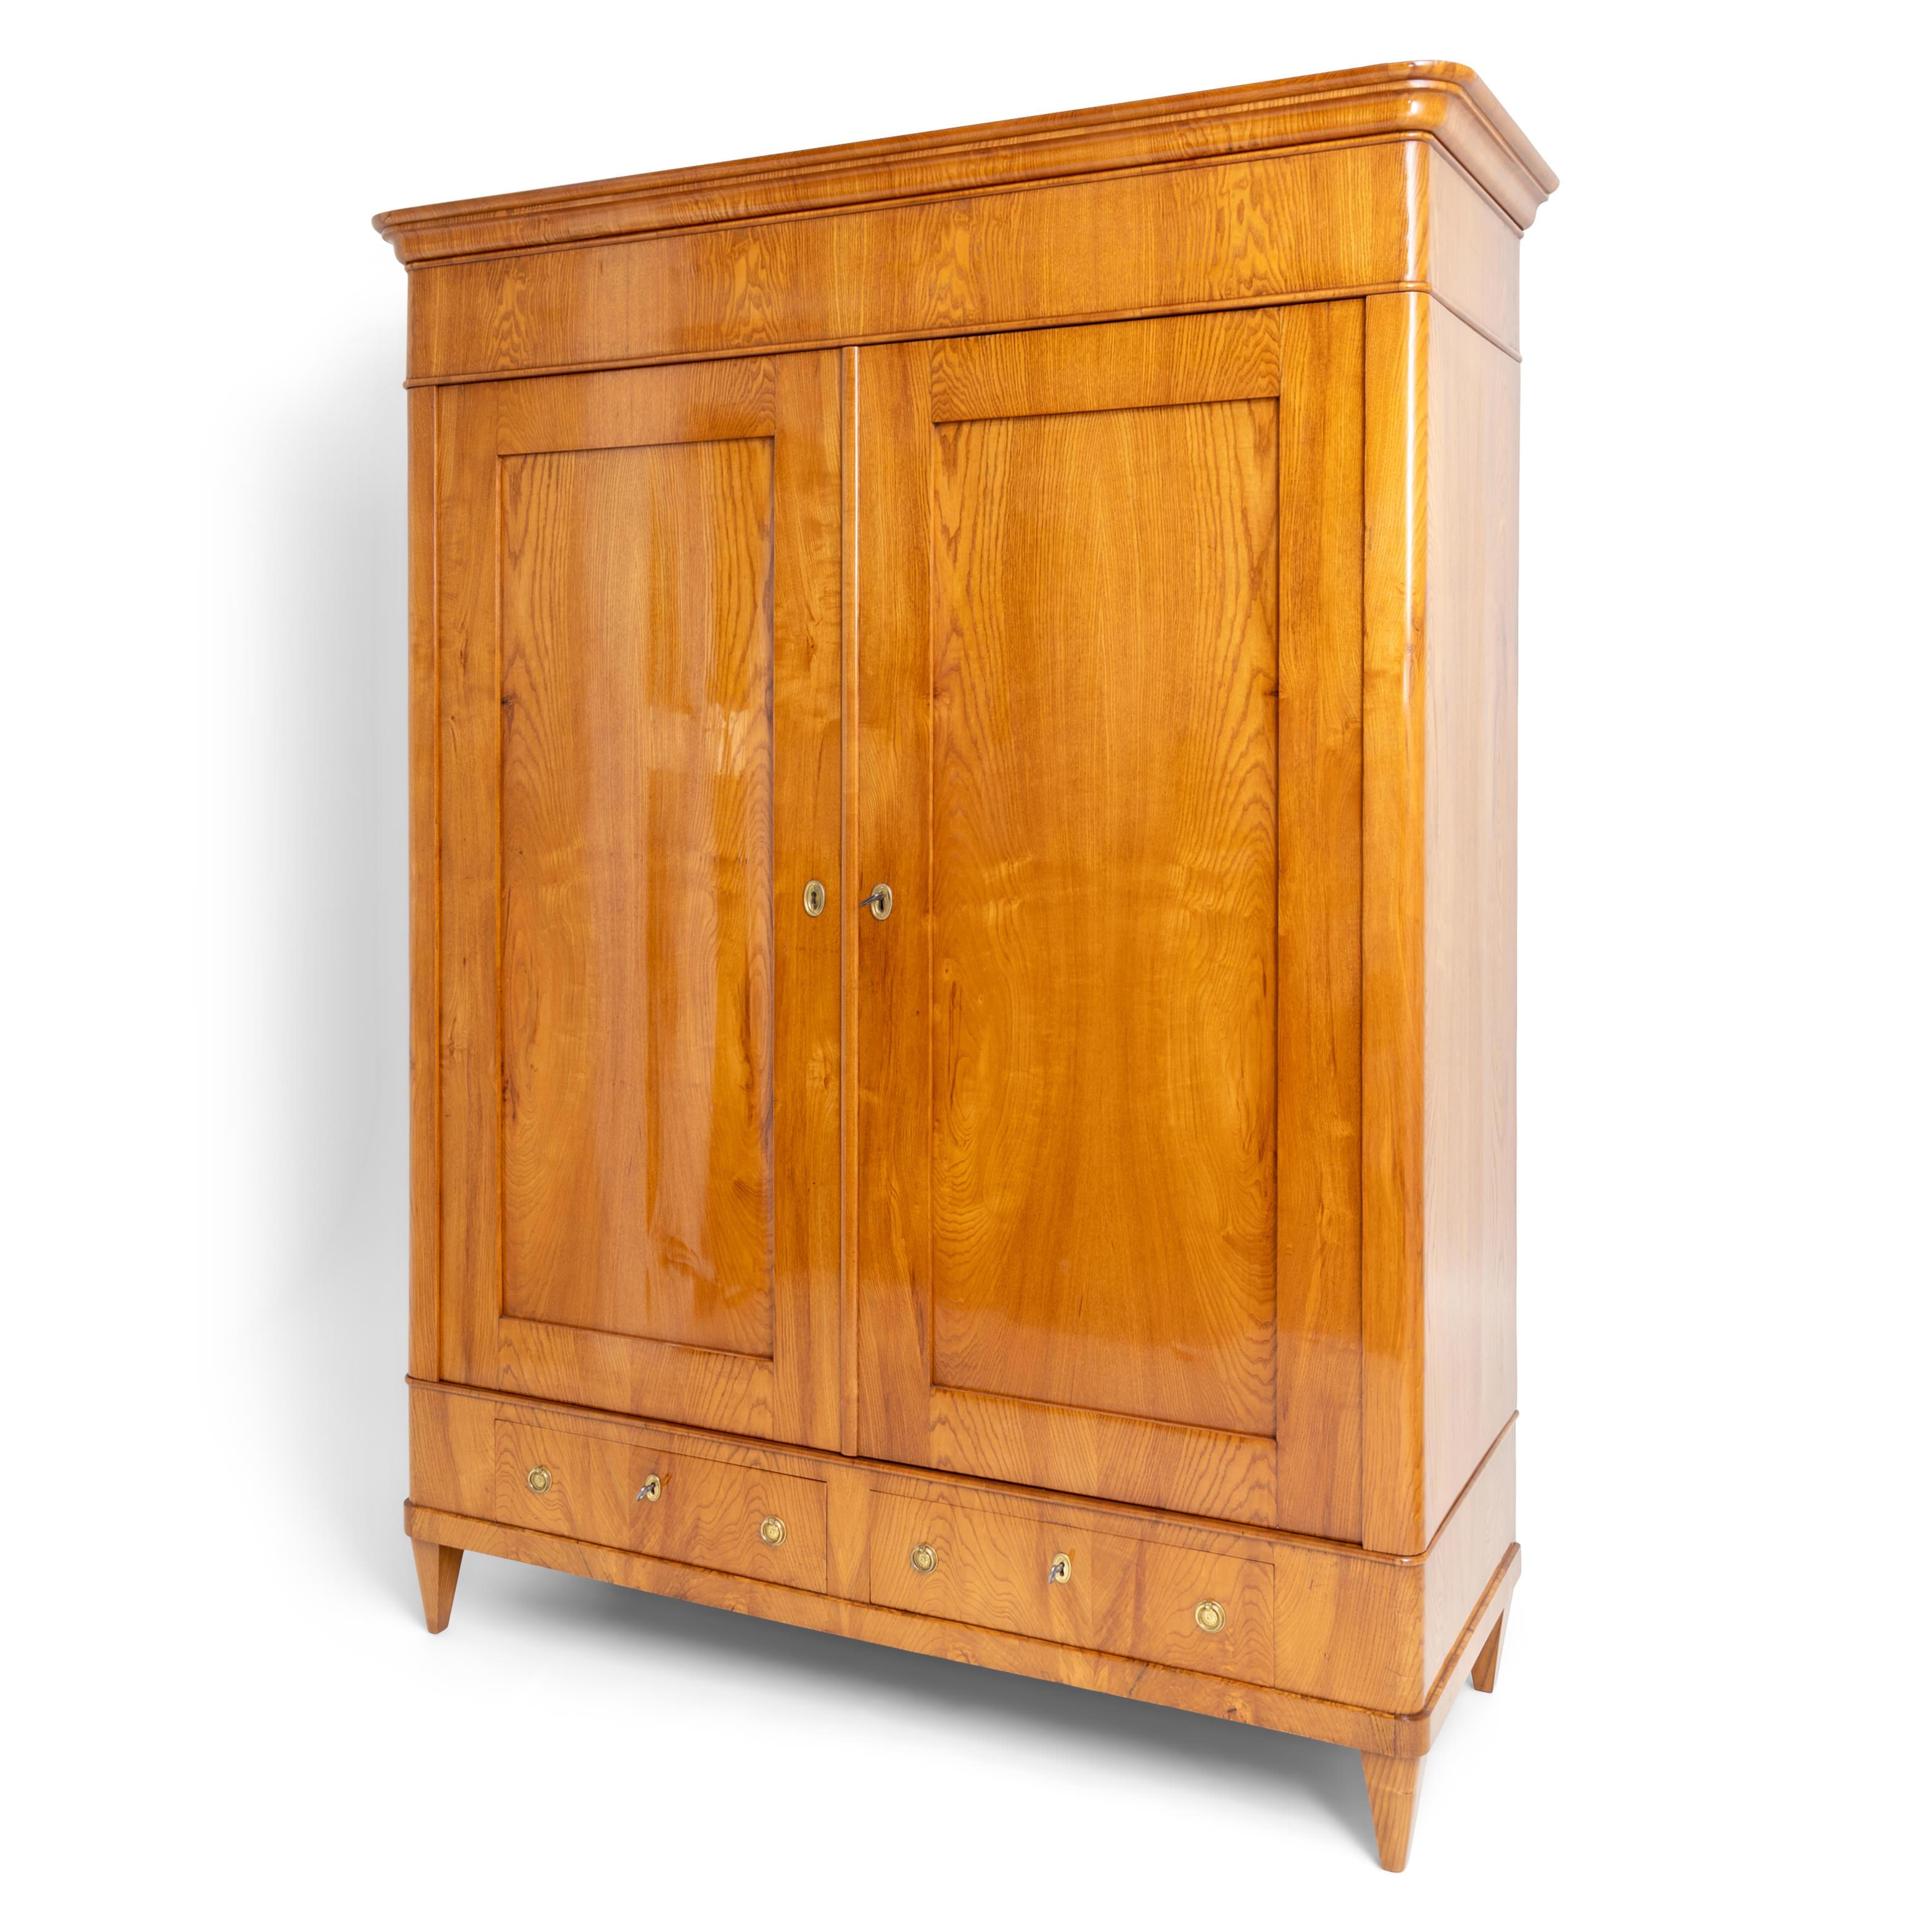 Large ash two-door wardrobe with profiled cornice, rounded corners and coffered doors and two drawers. The internal division consists of shelves and a clothes rail. Body width: 147 cm; body depth: 54 cm; interior depth: 49 cm. The cabinet has been